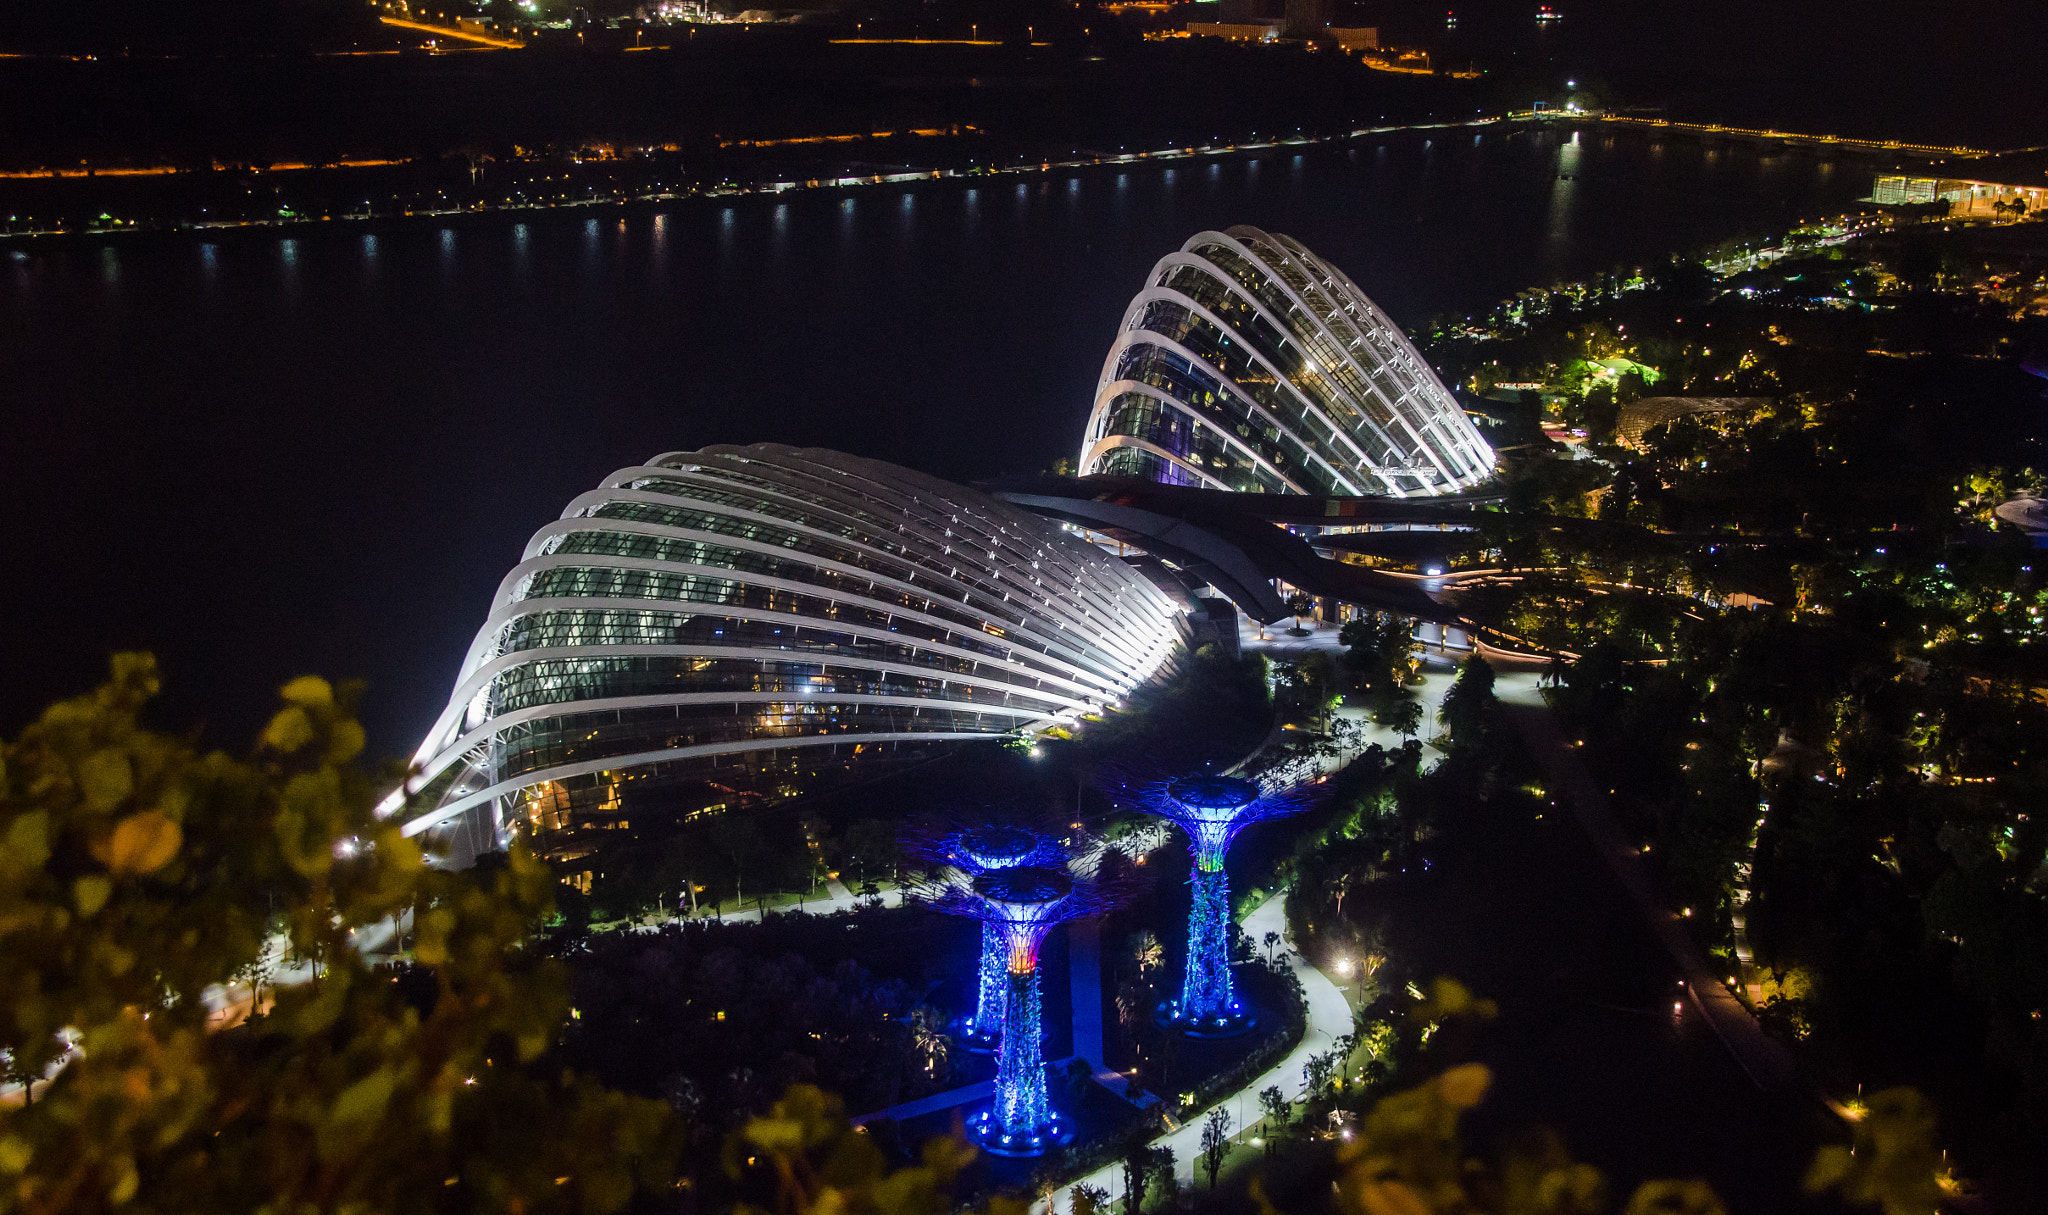 Nikon D7000 sample photo. Light show at gardens by the bay photography